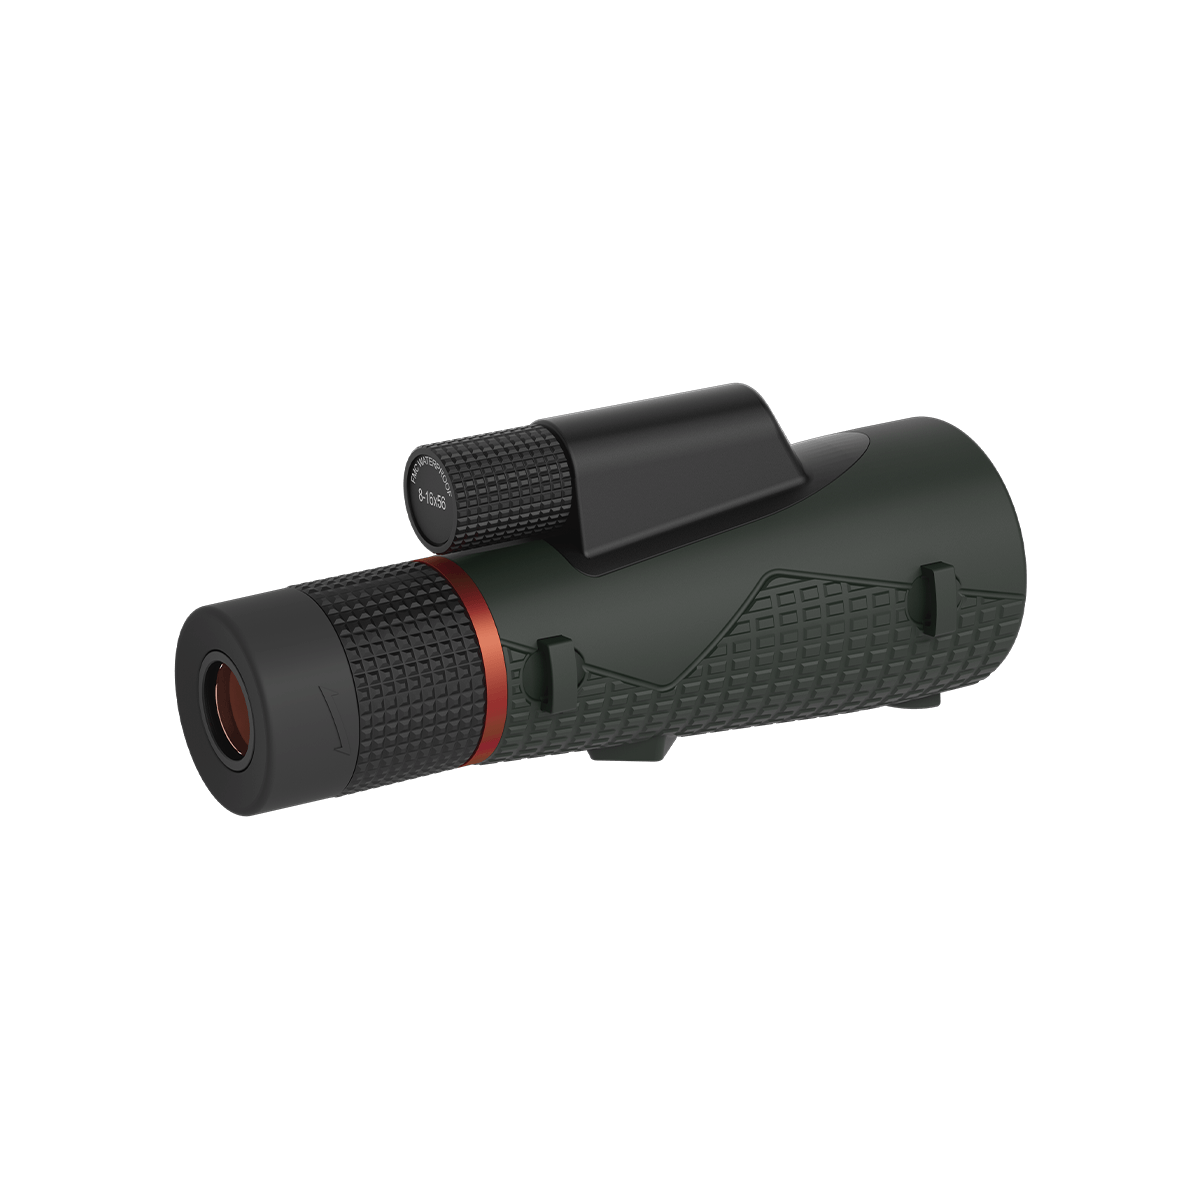 Forester 8-16x56 ED Monocular